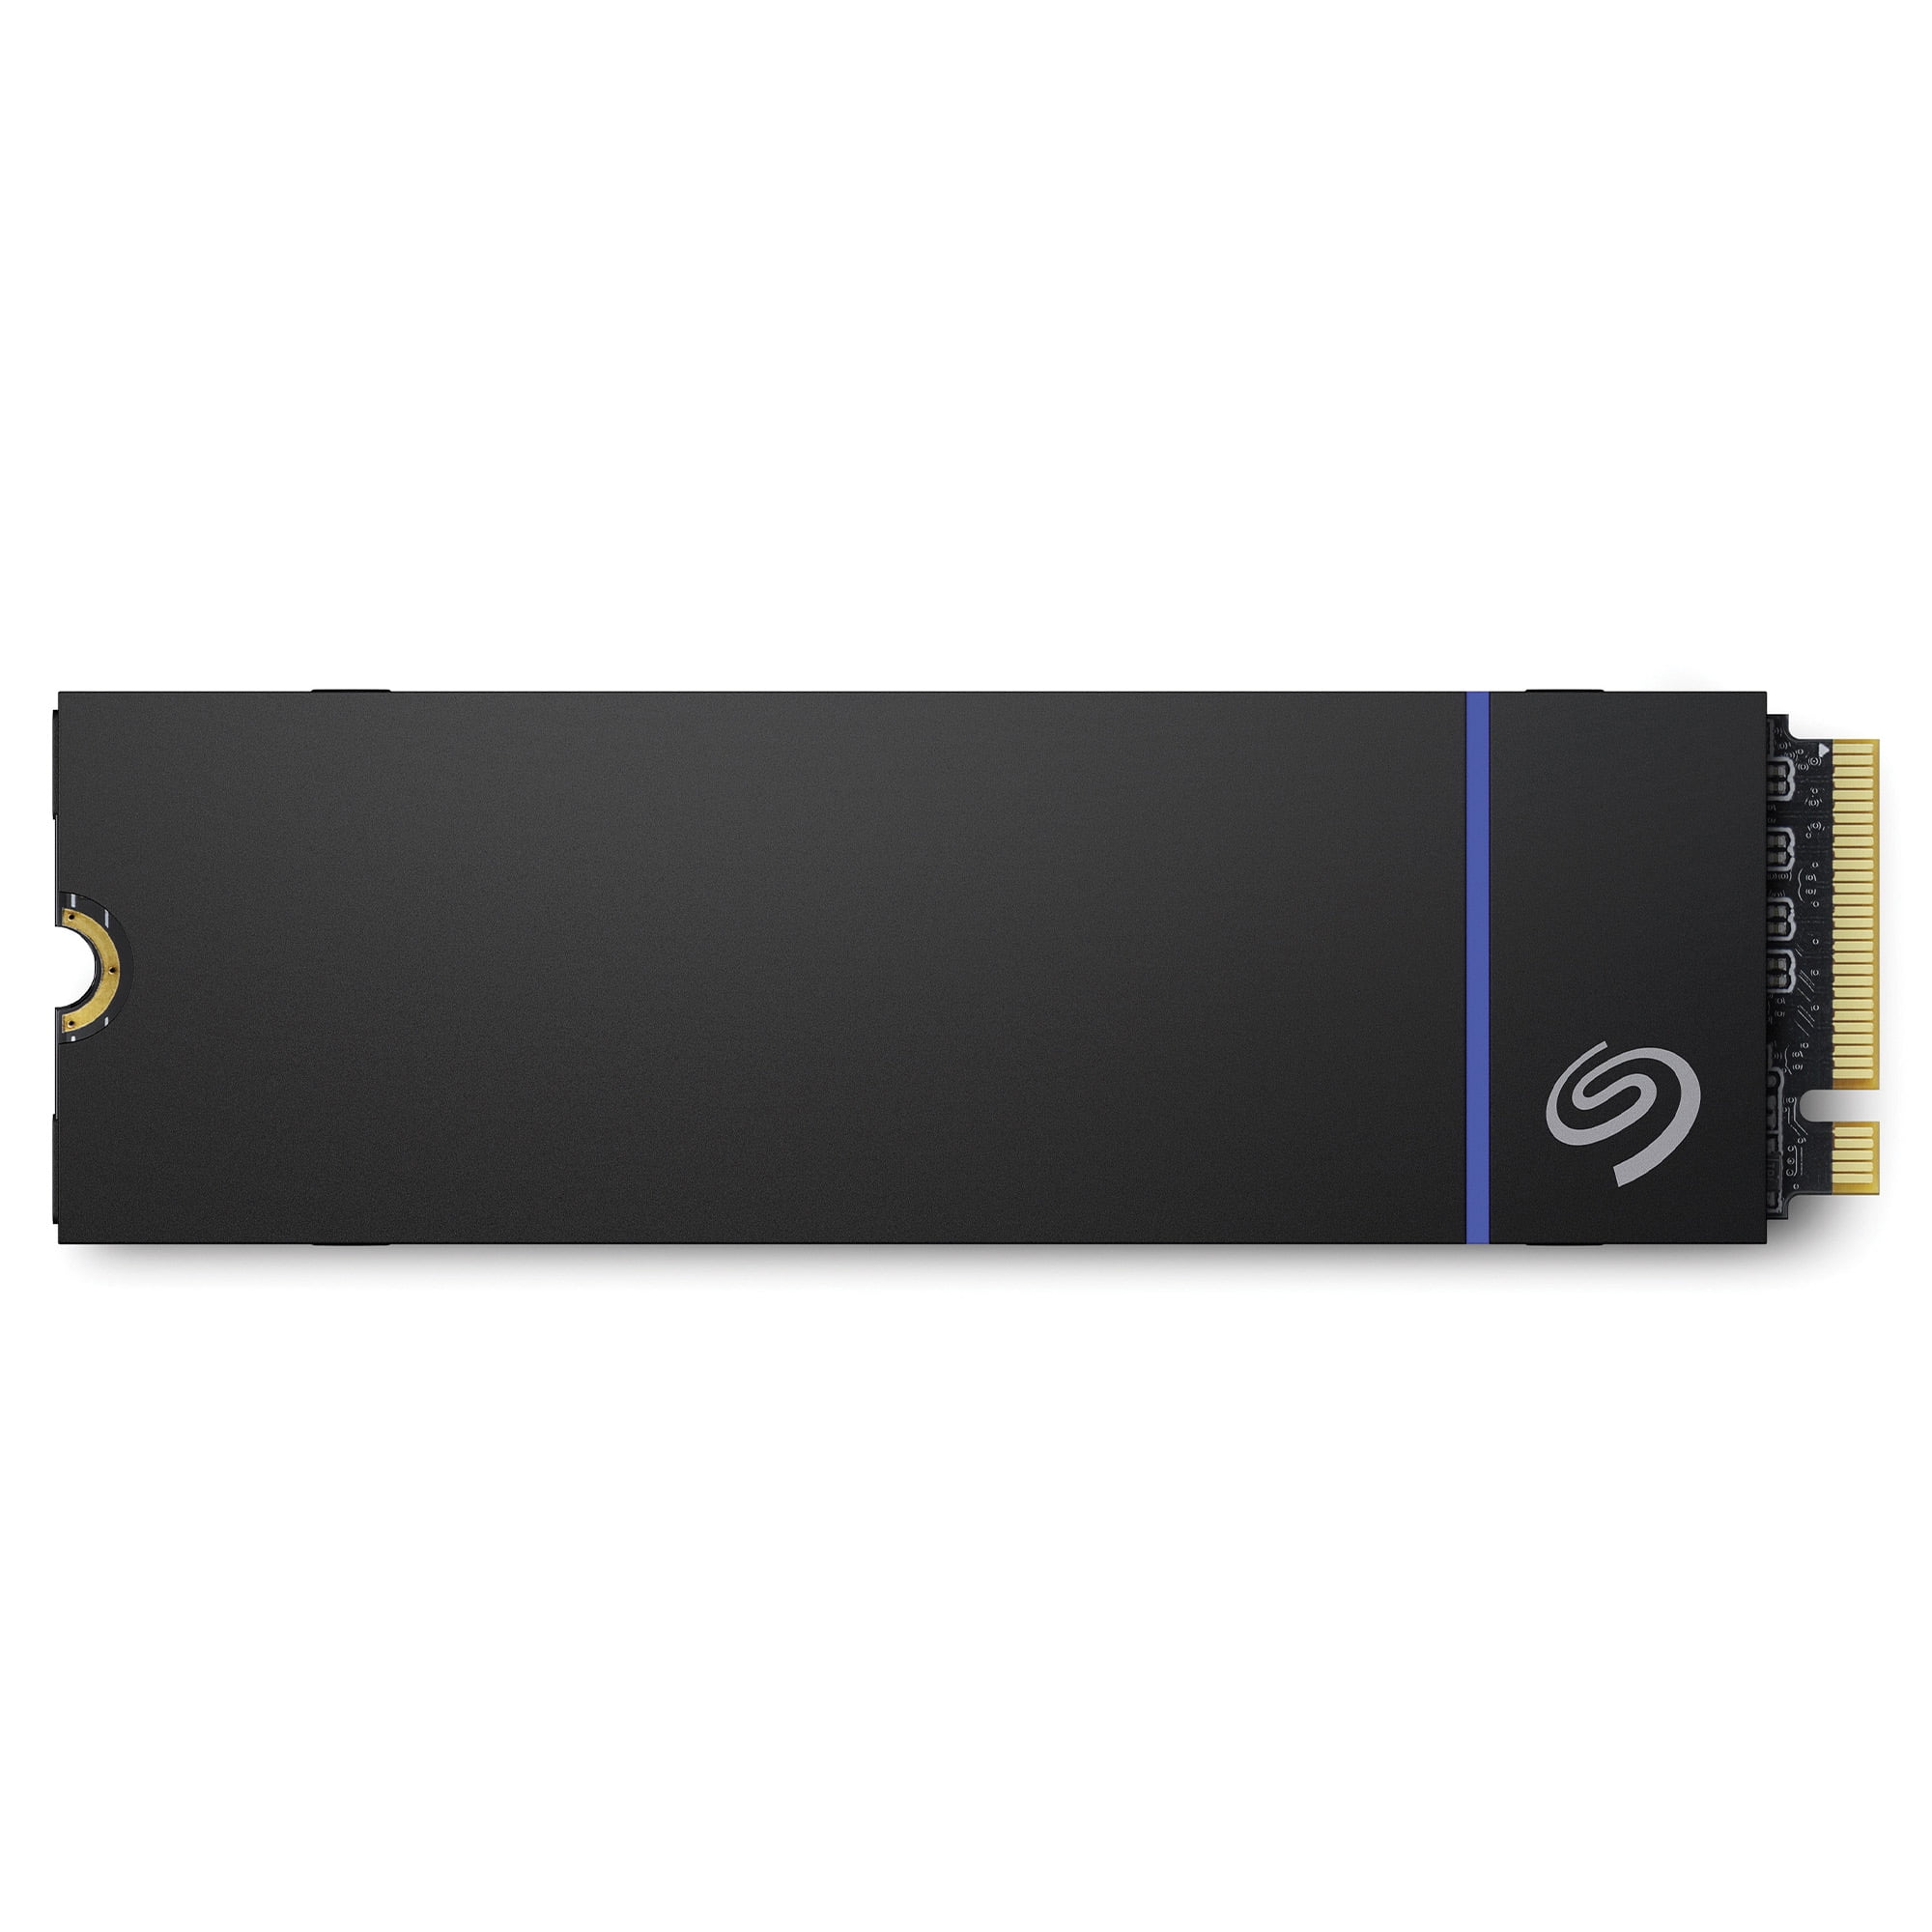 WD_Black 1TB SN850P NVMe SSD for PS5 consoles - WDBBYV0010BNC-WRWM 